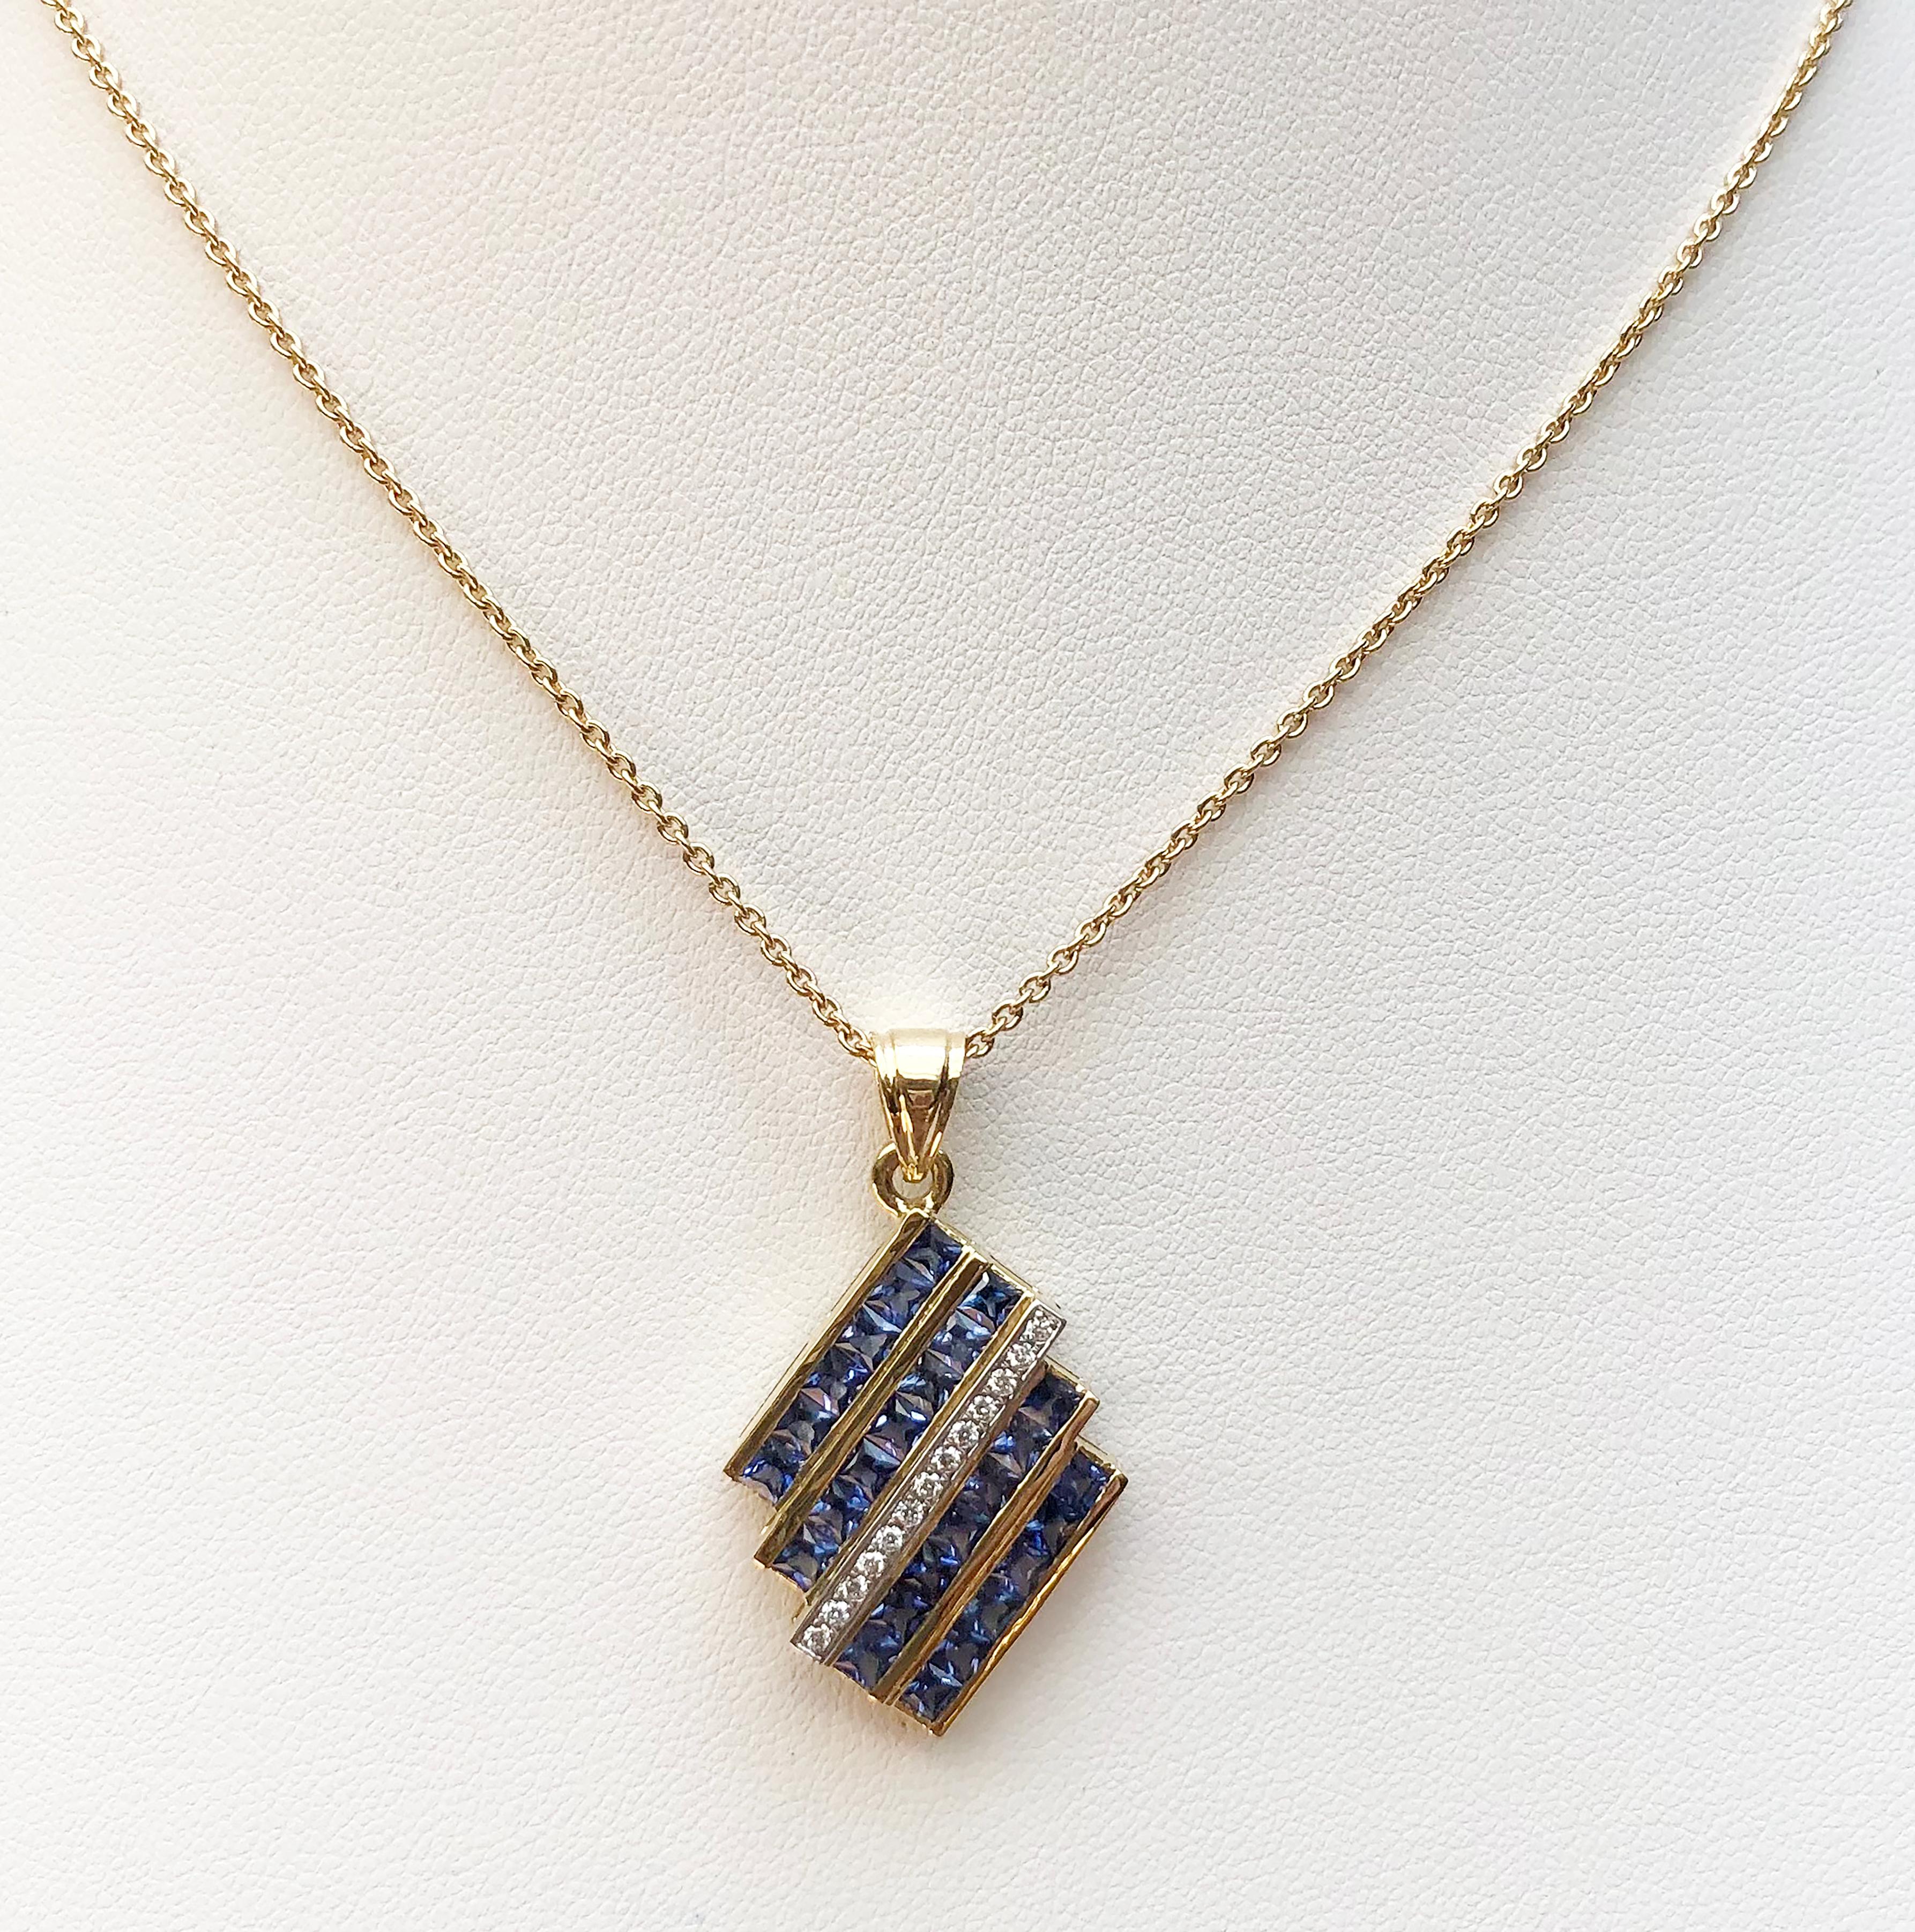 Blue Sapphire 2.71 carats with Diamond 0.10 carat Pendant set in 18 Karat Gold Settings
(chain not included)

Width:  1.9 cm 
Length: 3.4 cm
Total Weight: 6.86 grams

